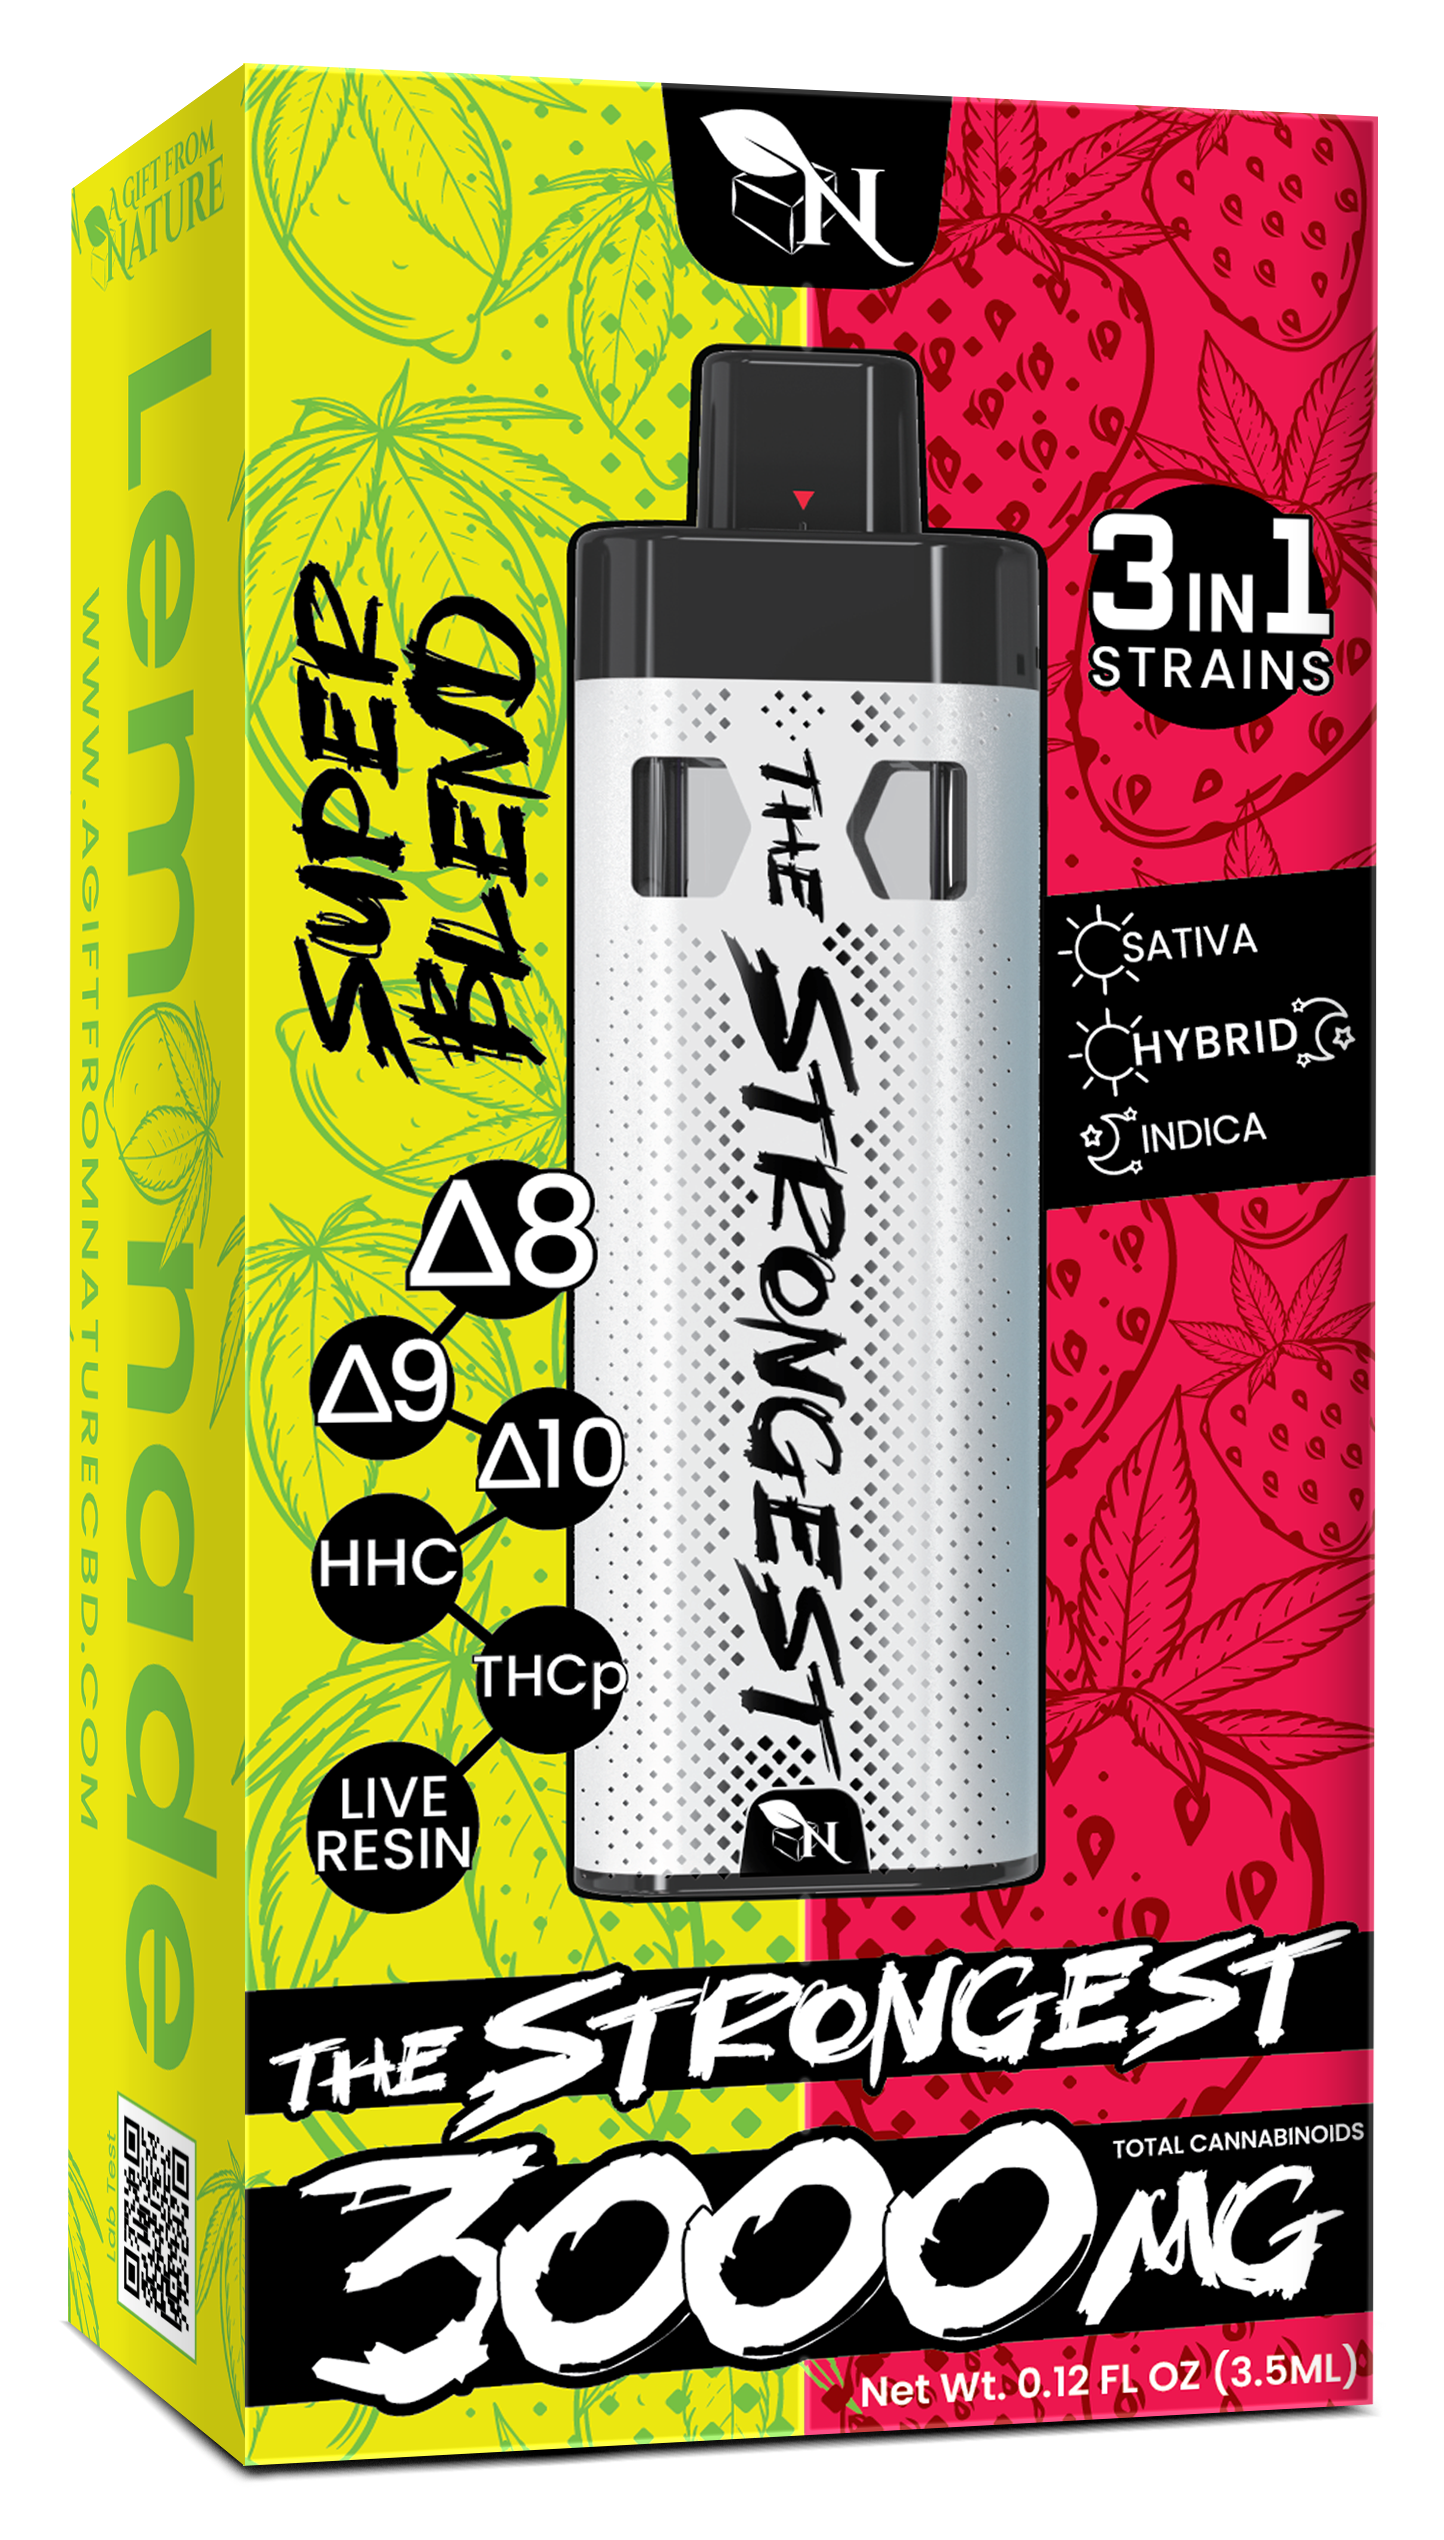 AGFN - The Strongest Super Blend THC 3ML Disposable I (Display of 5)